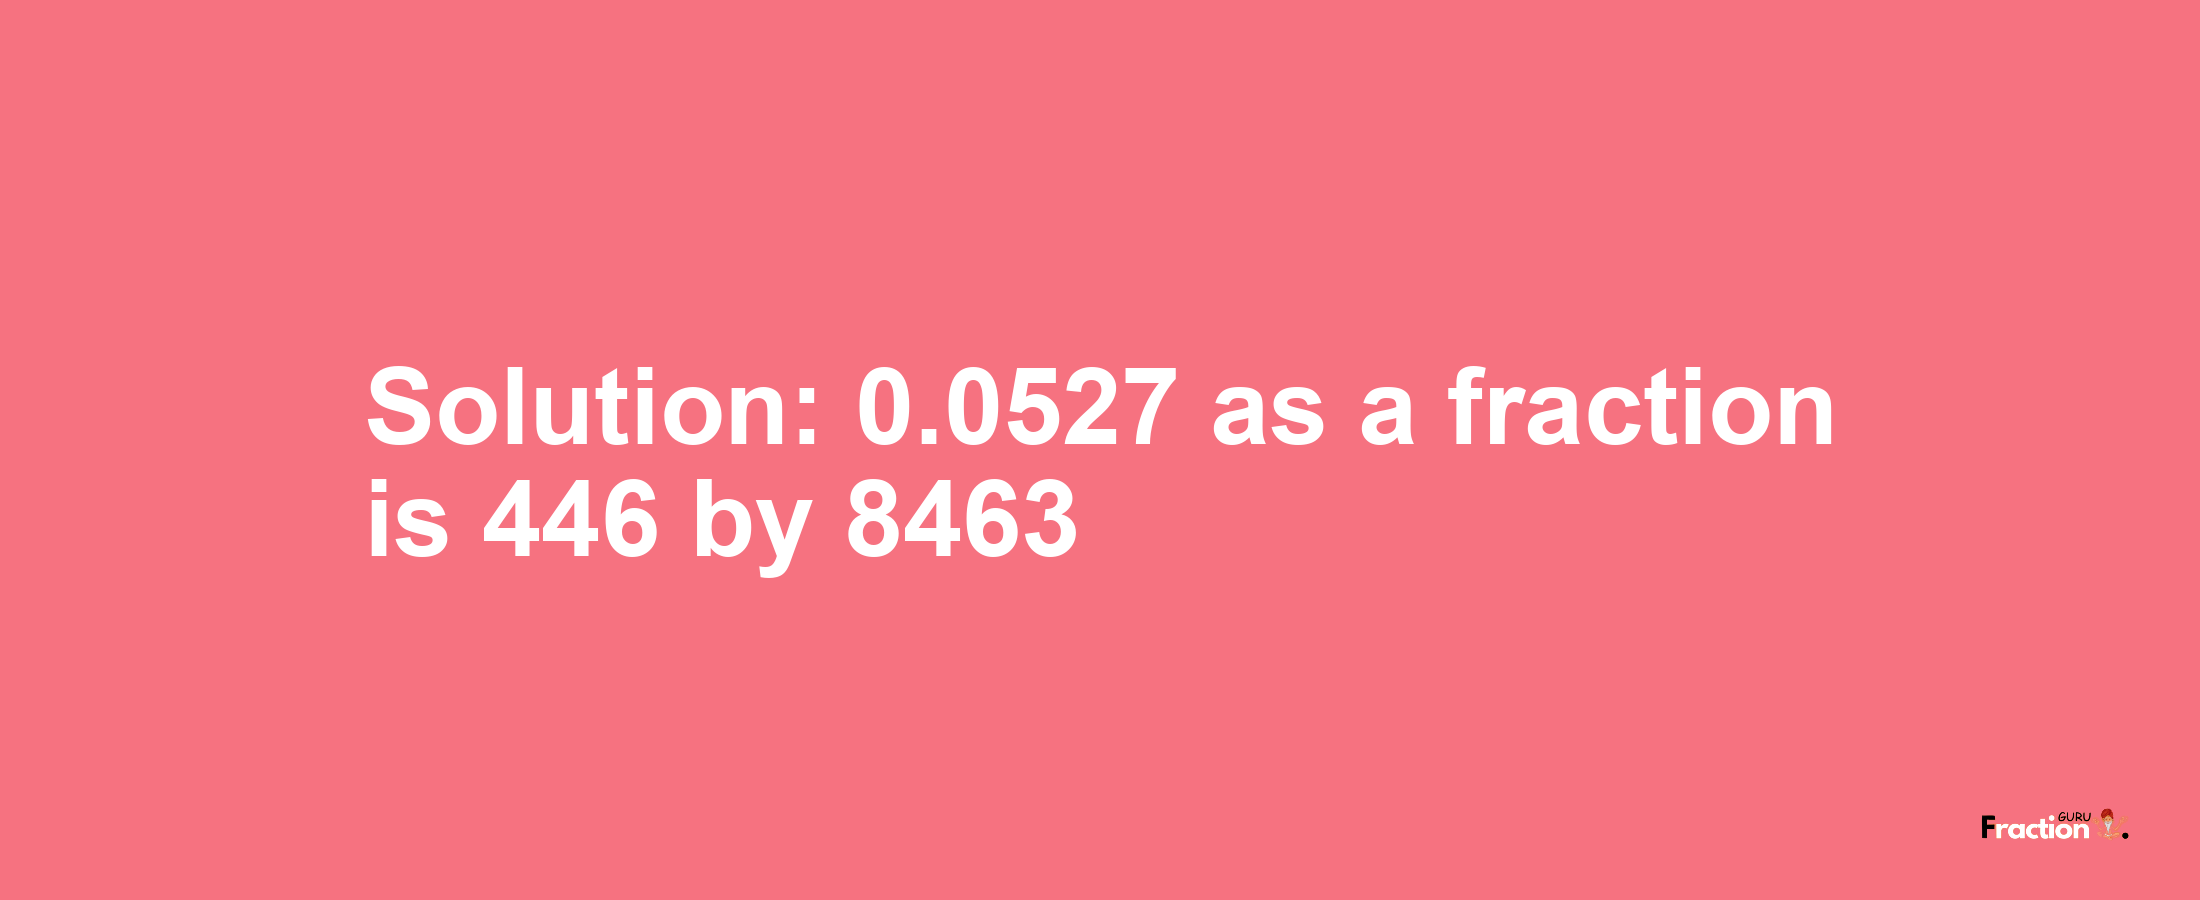 Solution:0.0527 as a fraction is 446/8463